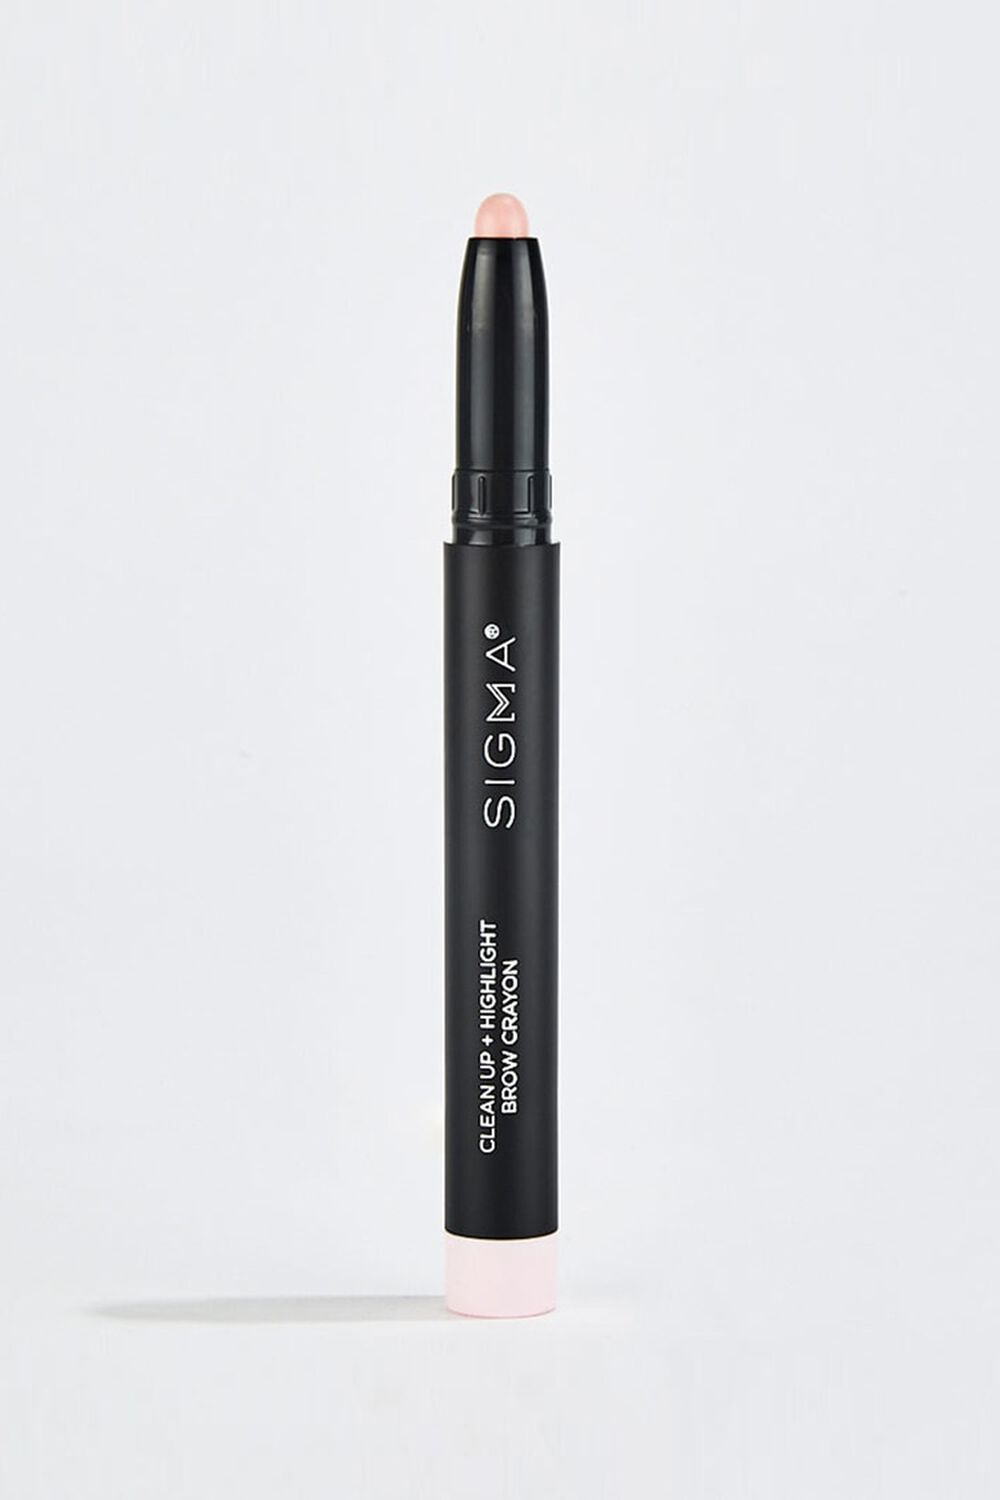 Sigma Beauty Clean Up & Highlight Brow Crayon, image 1